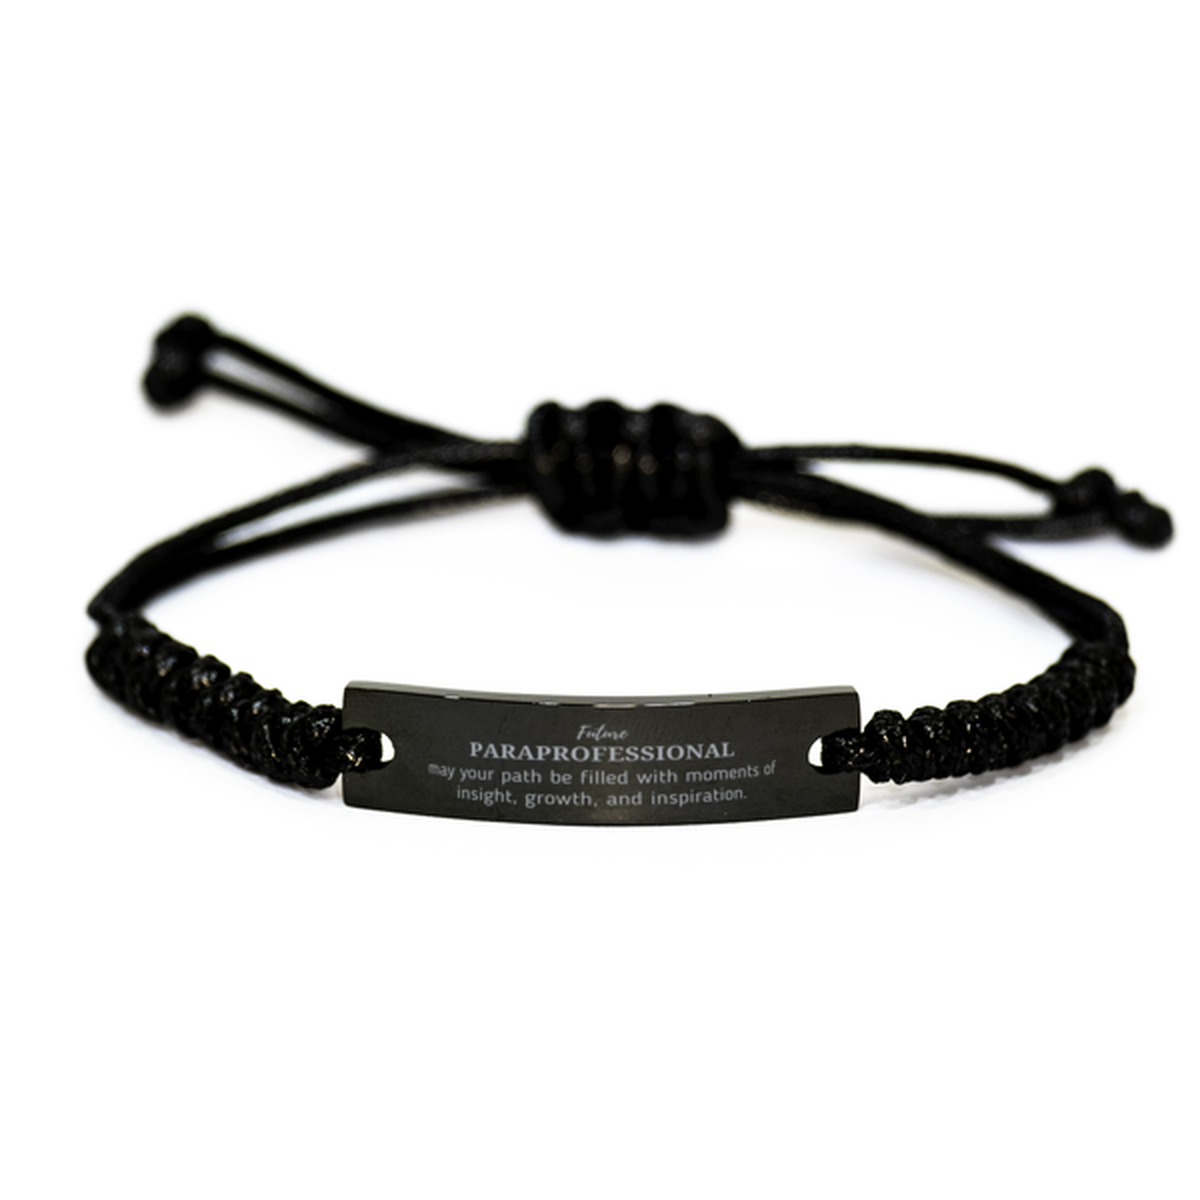 Future Paraprofessional Gifts, May your path be filled with moments of insight, Graduation Gifts for New Paraprofessional, Christmas Unique Black Rope Bracelet For Men, Women, Friends